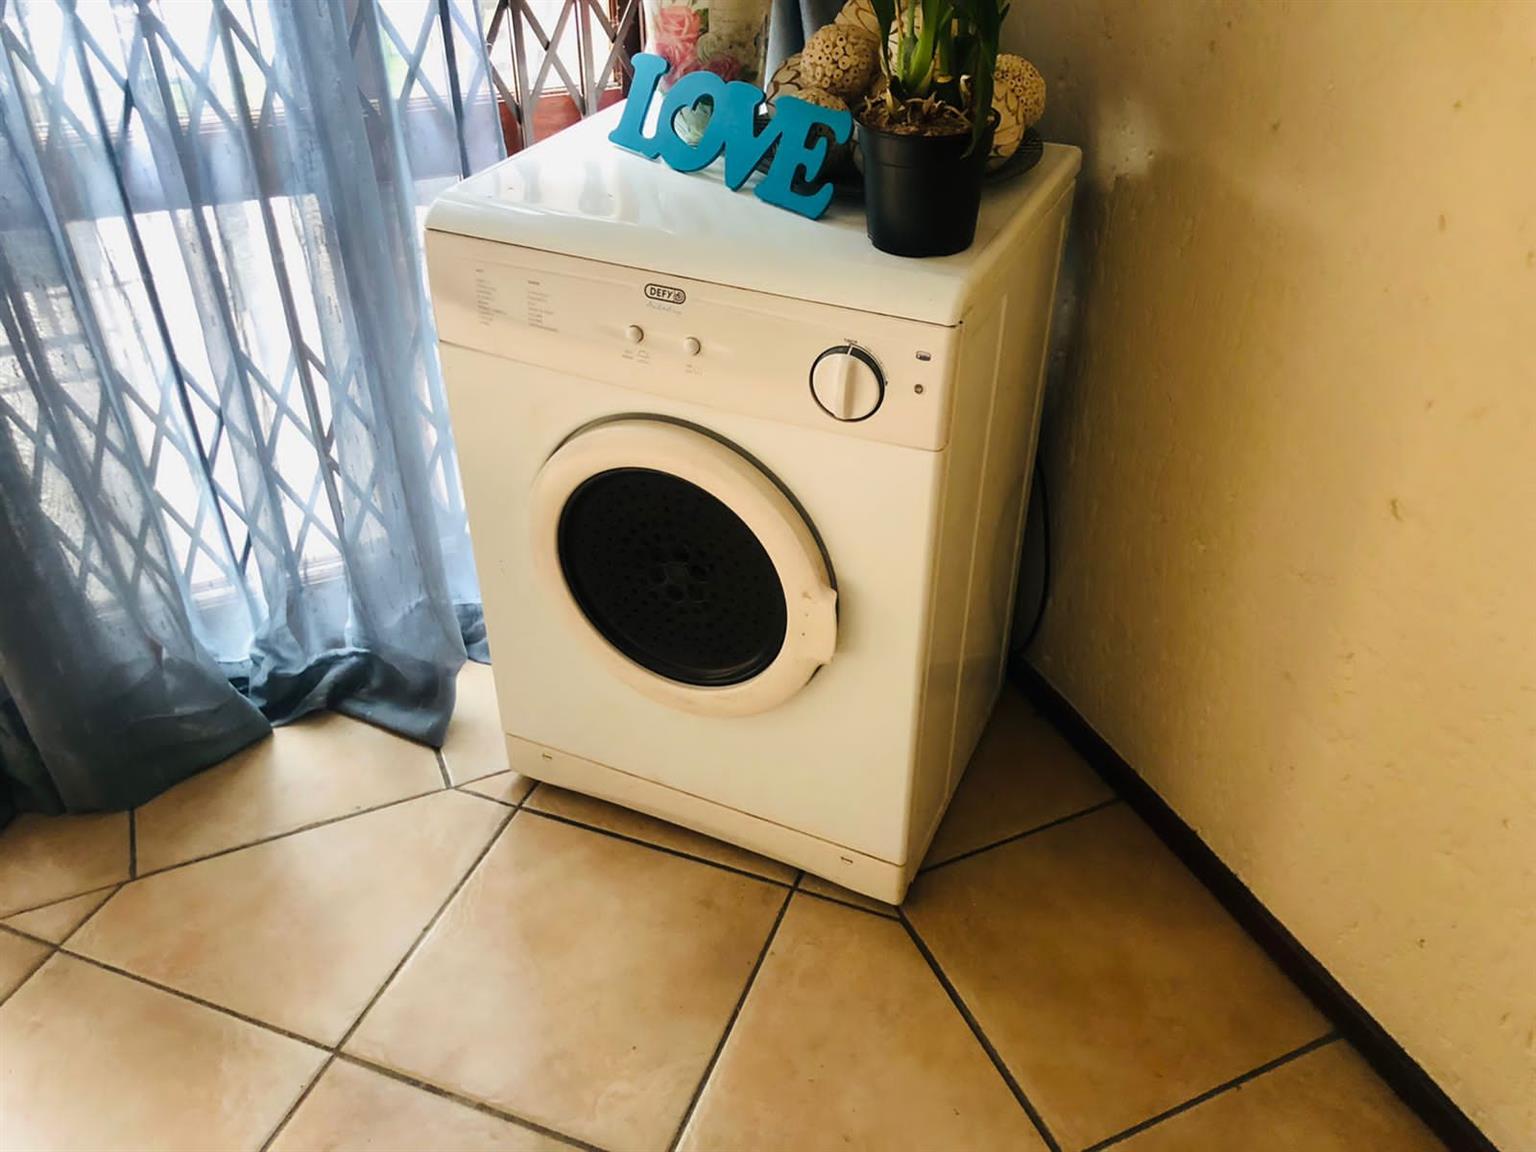 Hi there I’m selling my defy tumble dryer in good working order